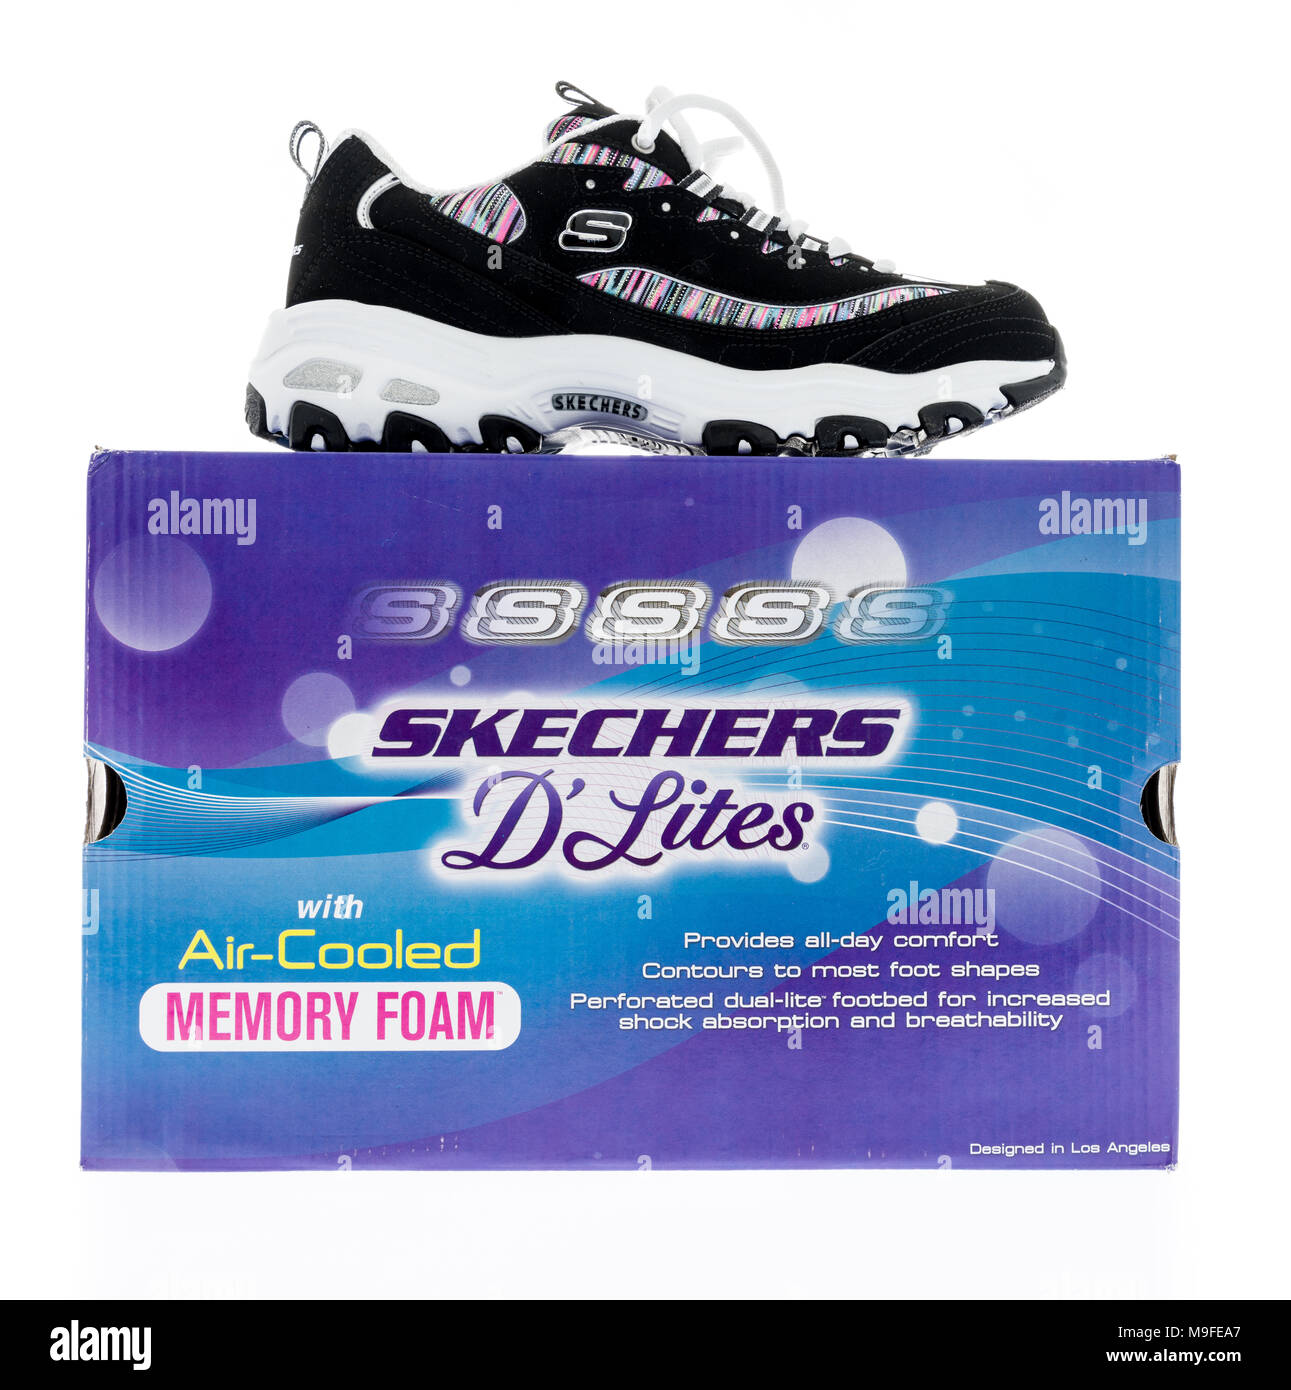 skechers new shoes 2018